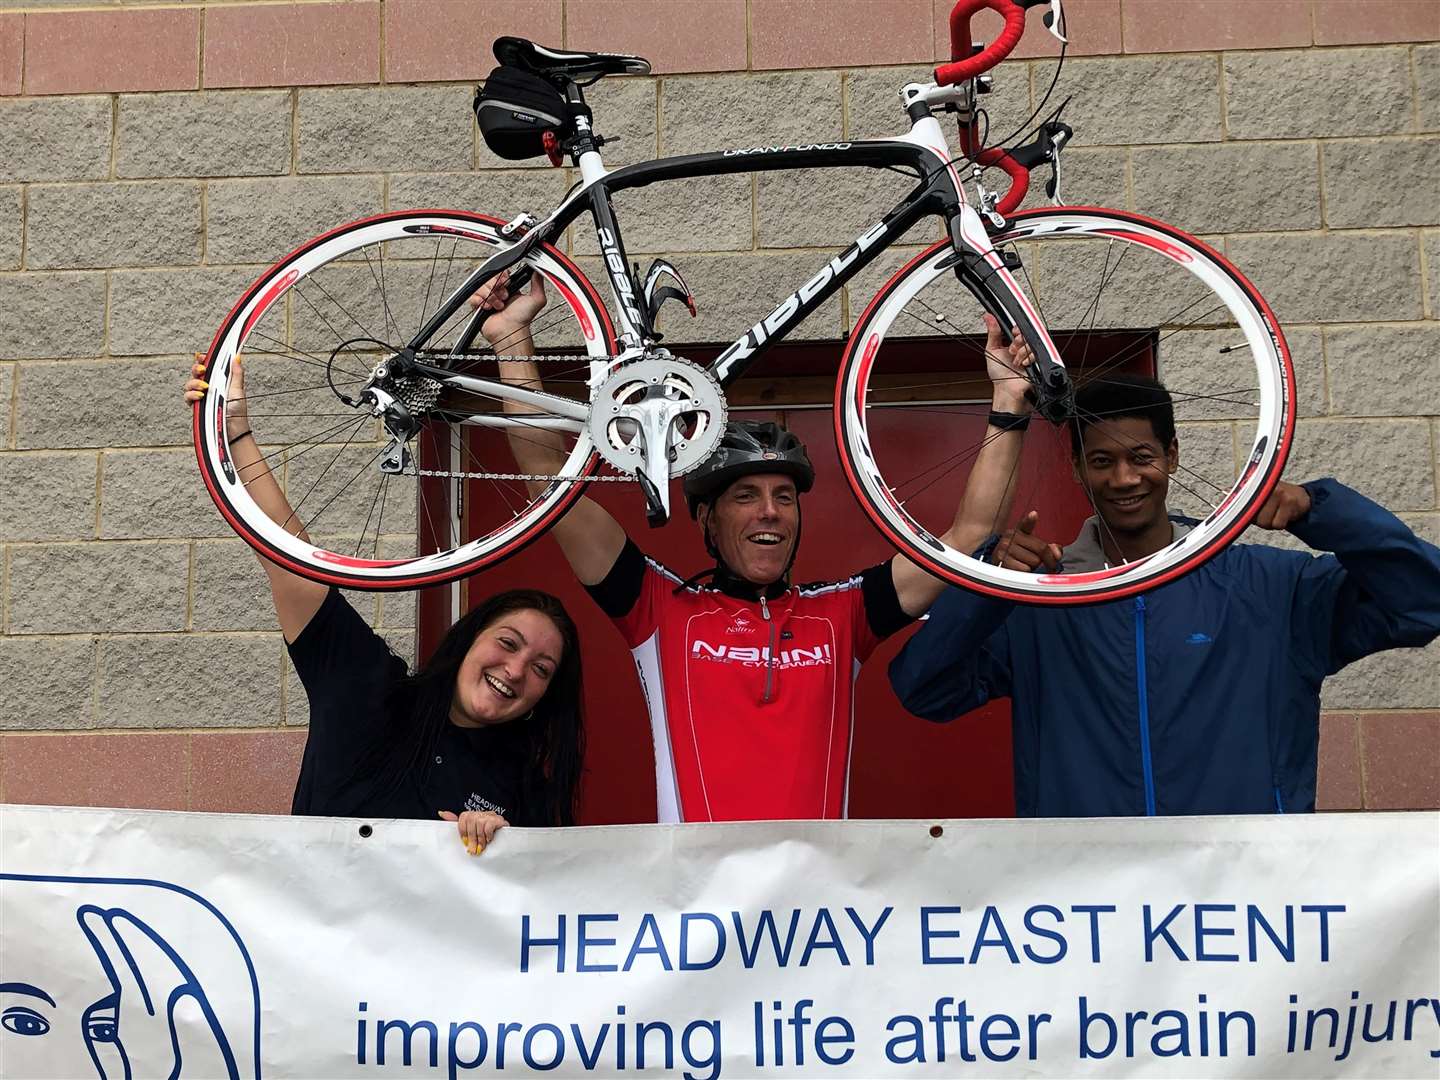 Kevin has raised about £2,000 for charity Headway